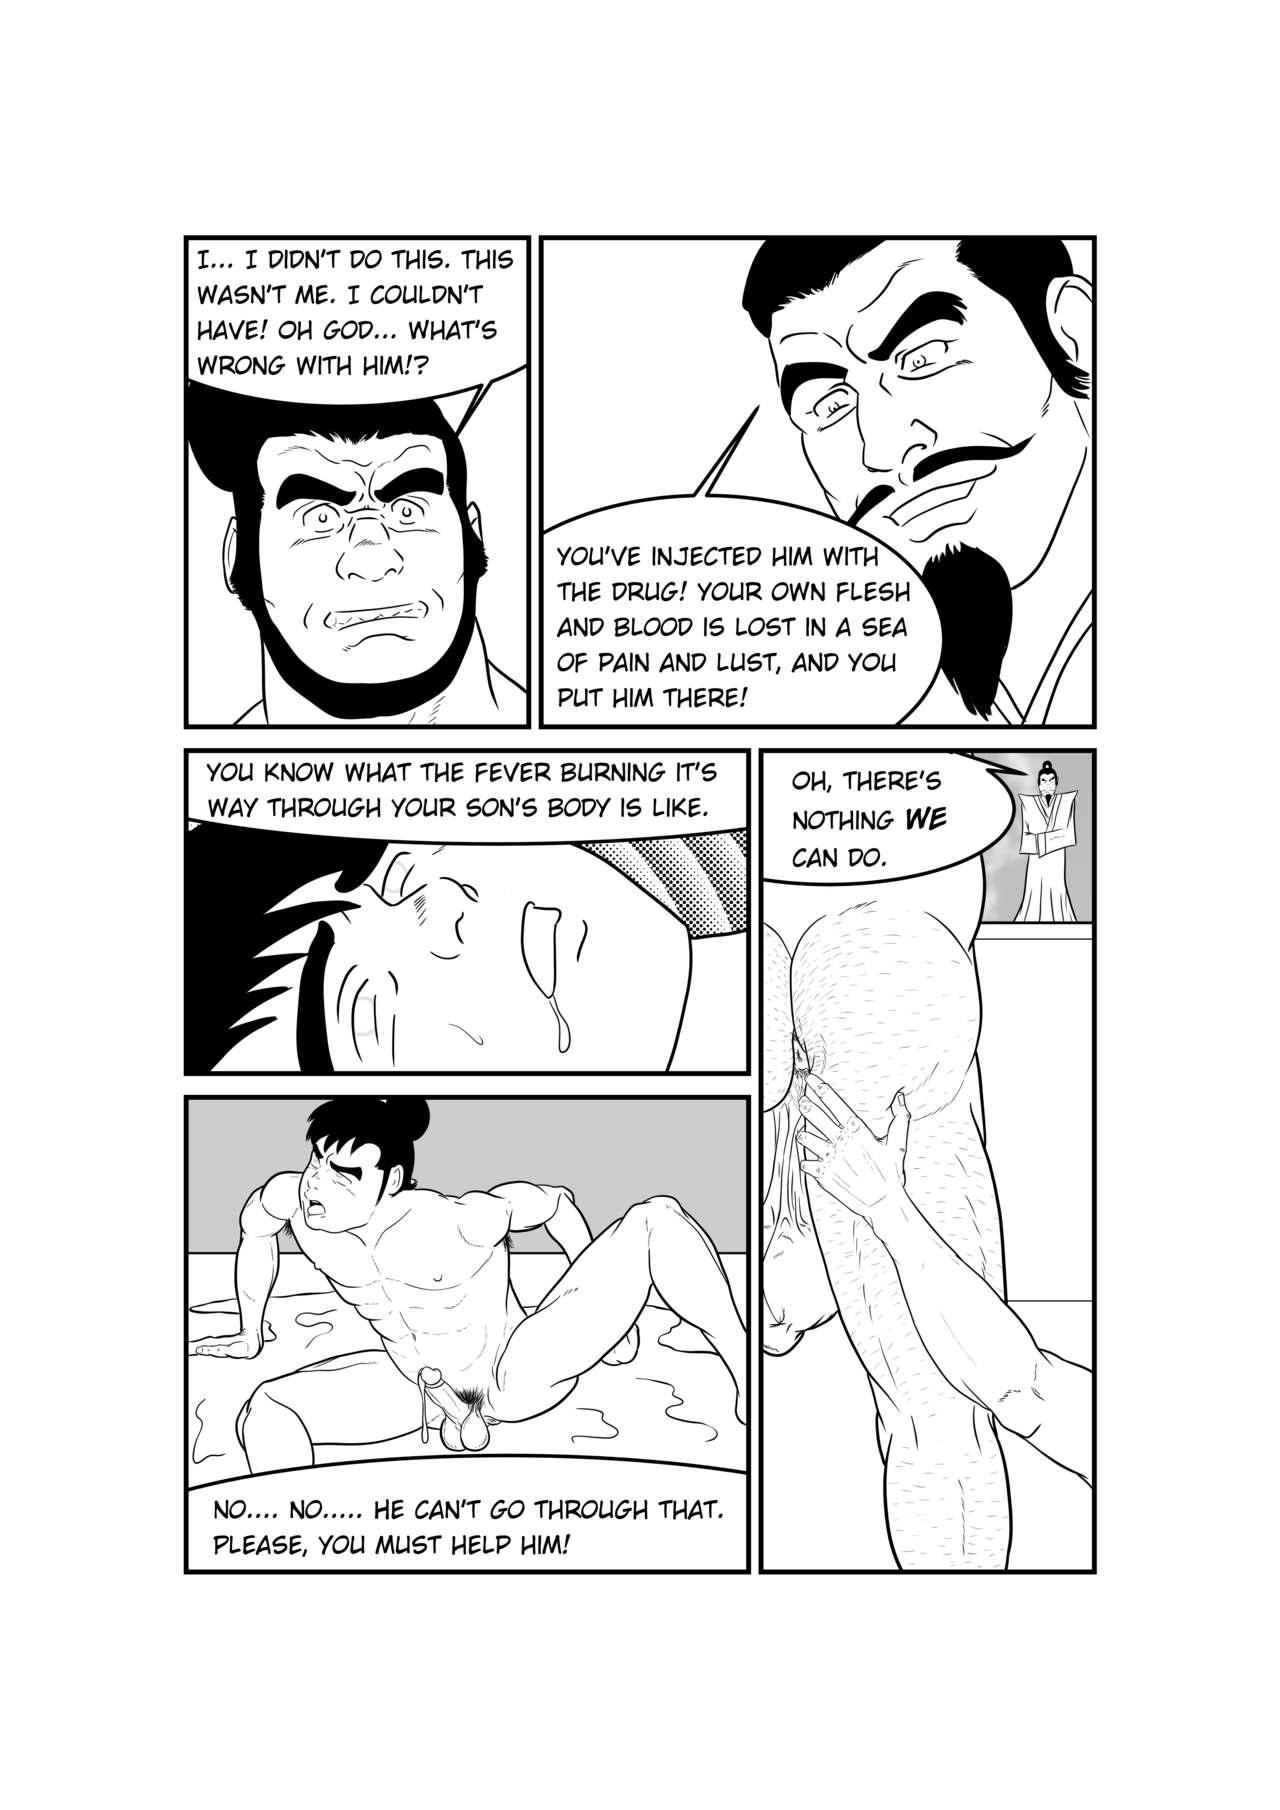 Titten Father and Son in Hell - Unauthorized Fan Comic - Original Teen Porn - Page 23